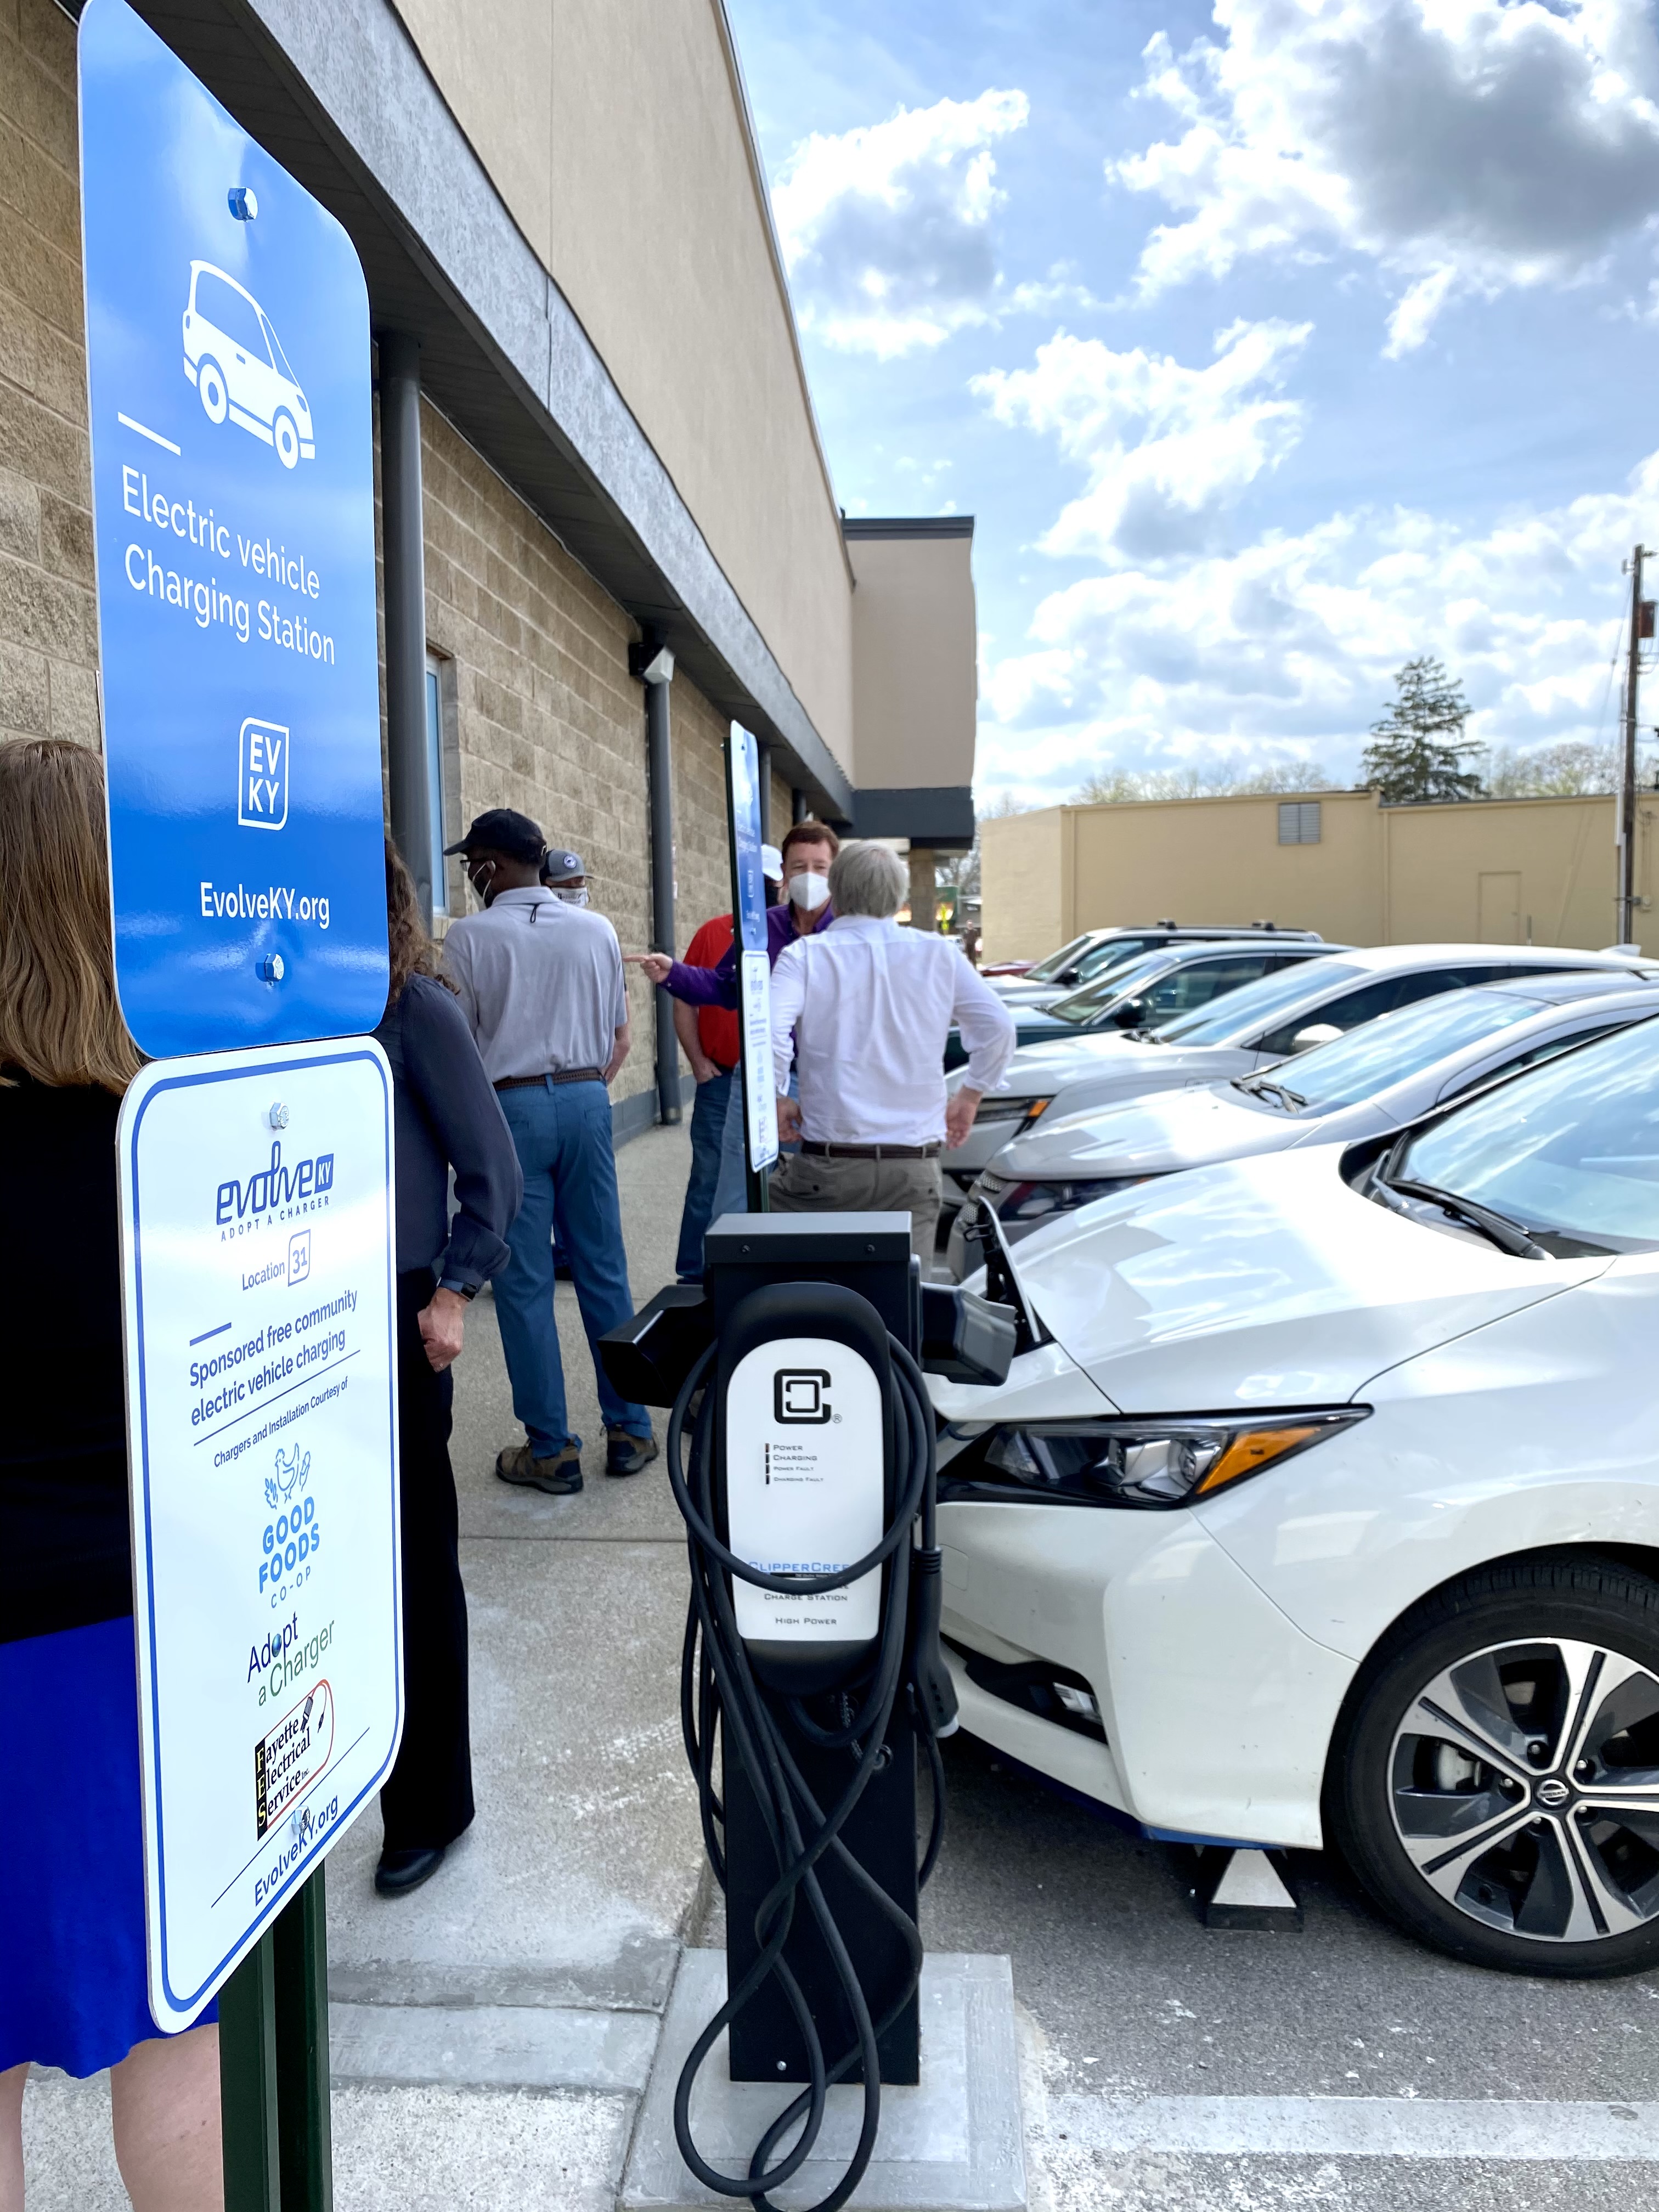 Coop Unveils New Electric Vehicle Charging Station Good Foods Coop